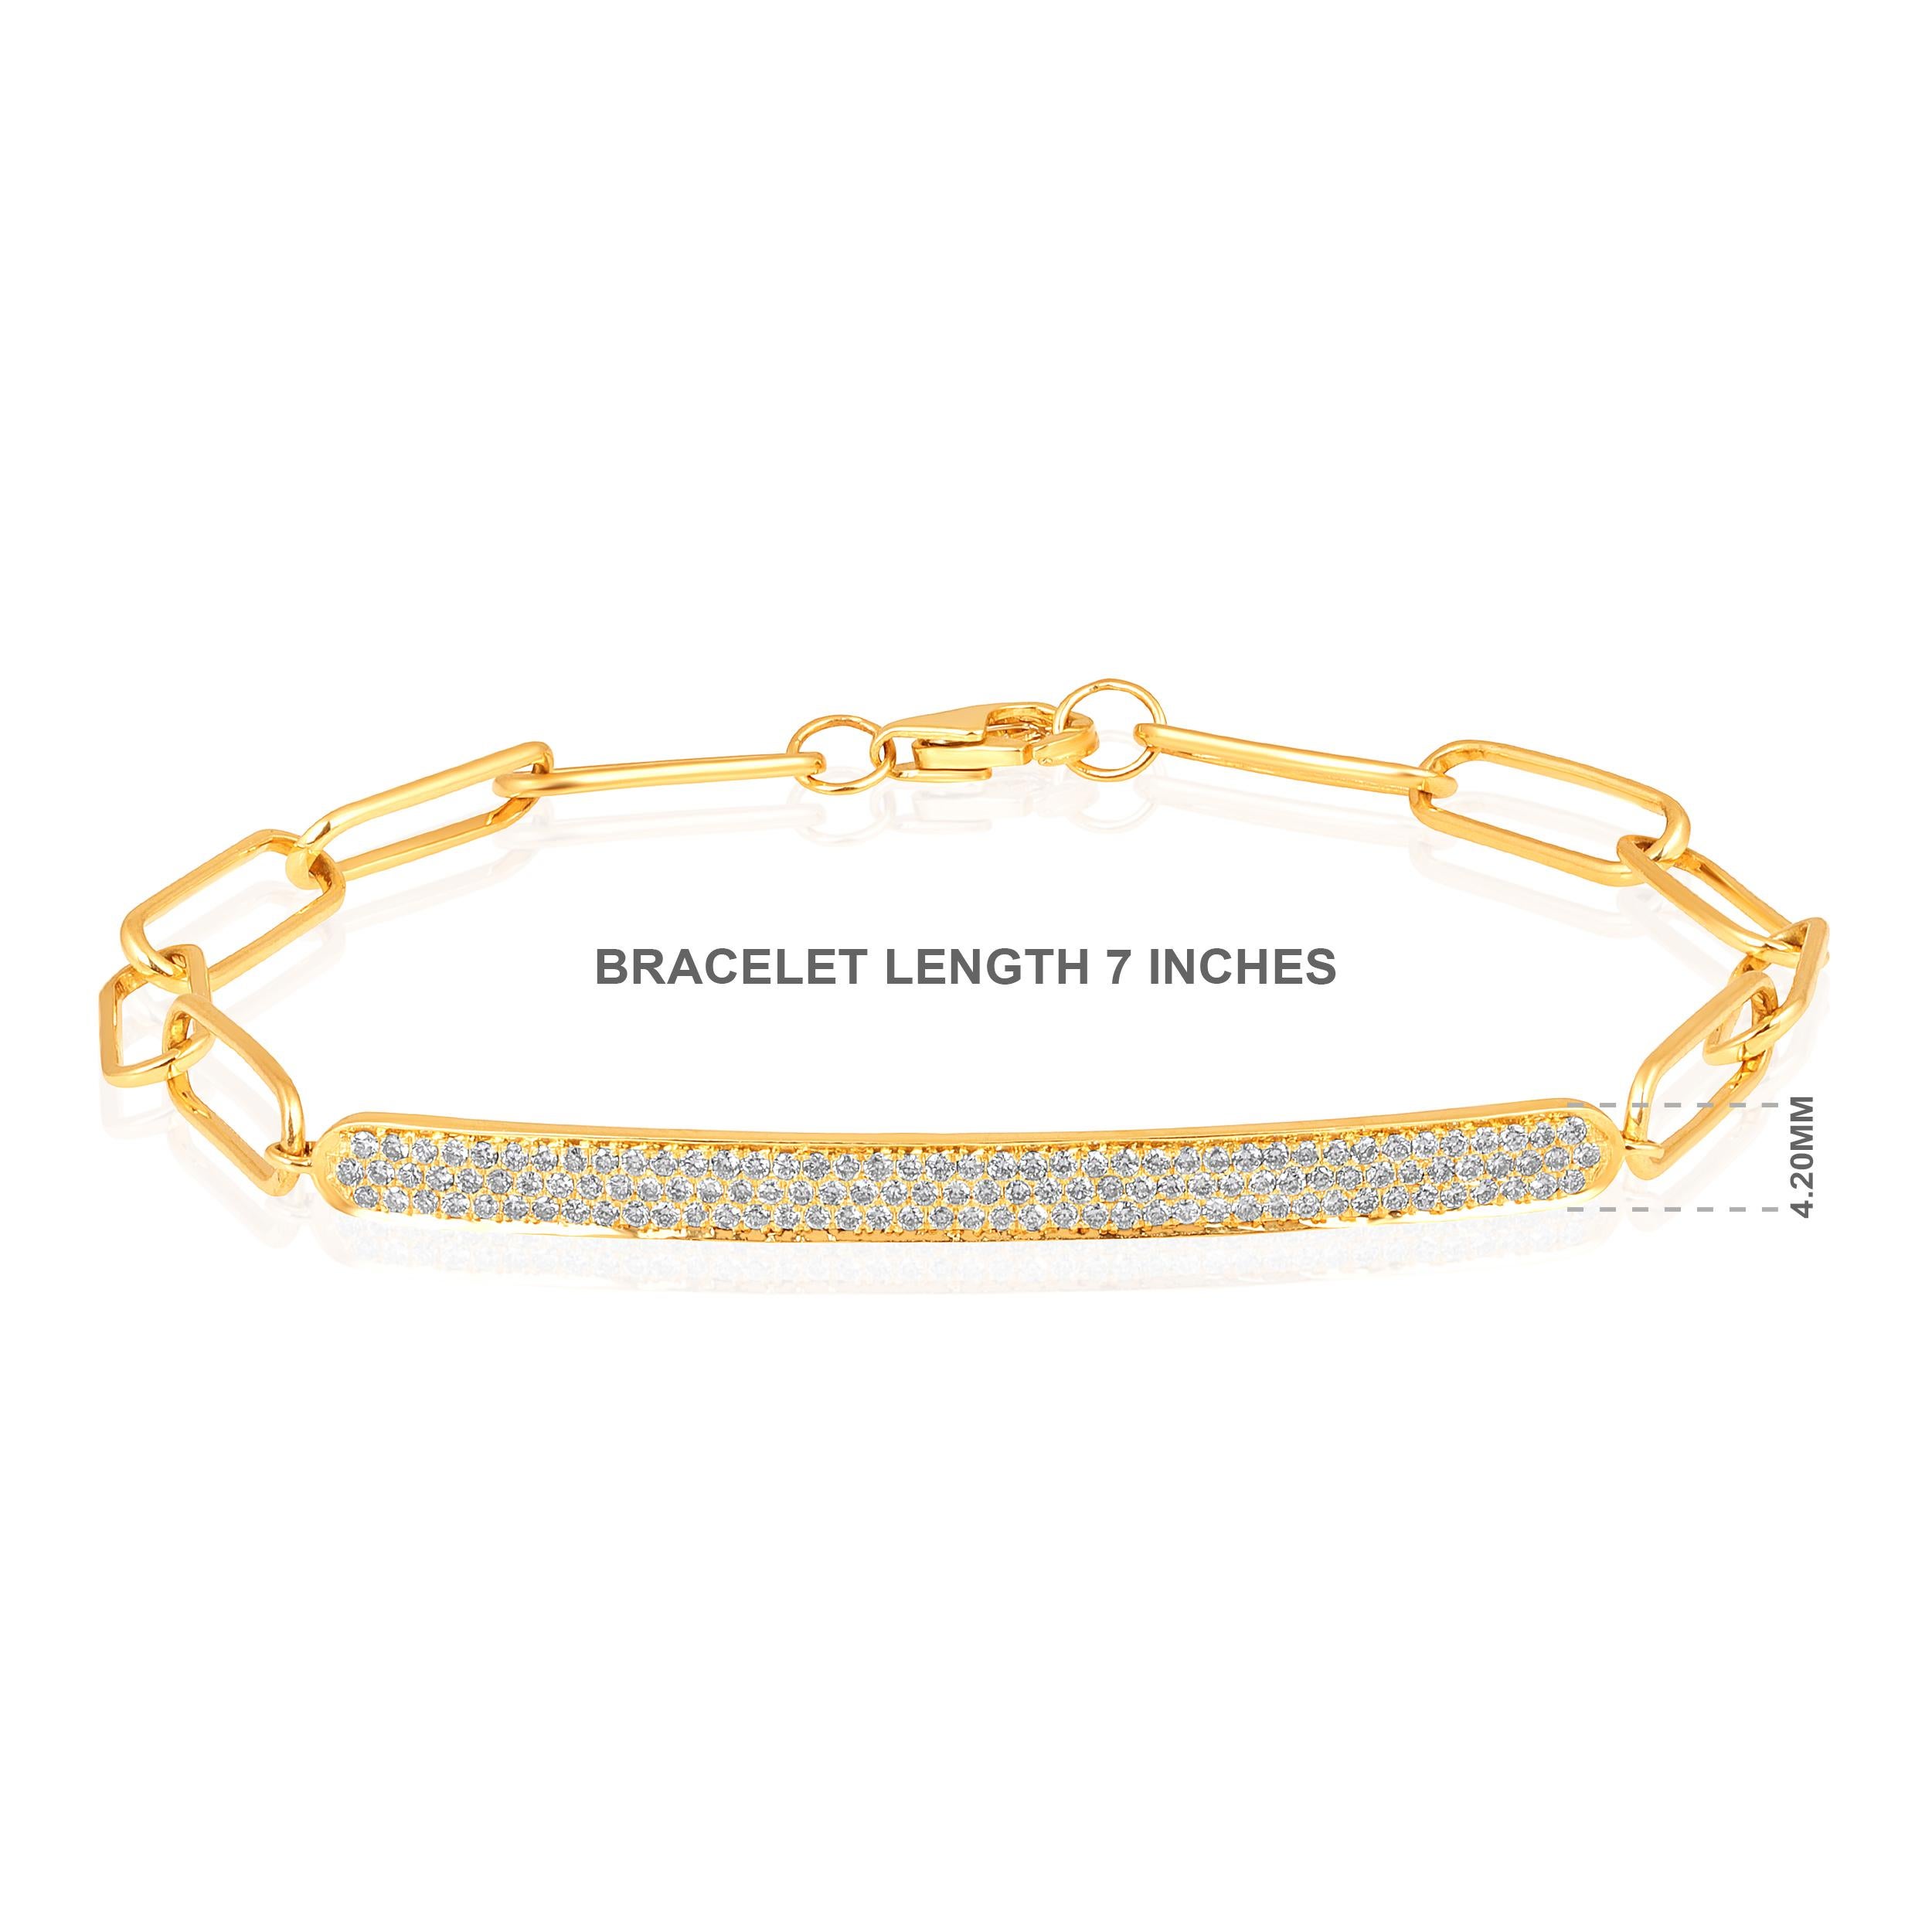 Crafted in 6.24 grams of 14K Yellow Gold, the bracelet contains 124 stones of Round Natural Diamonds with a total of 0.6 carat in E-F color and SI clarity. The bracelet length is 7 inches.

CONTEMPORARY AND TIMELESS ESSENCE: Crafted in